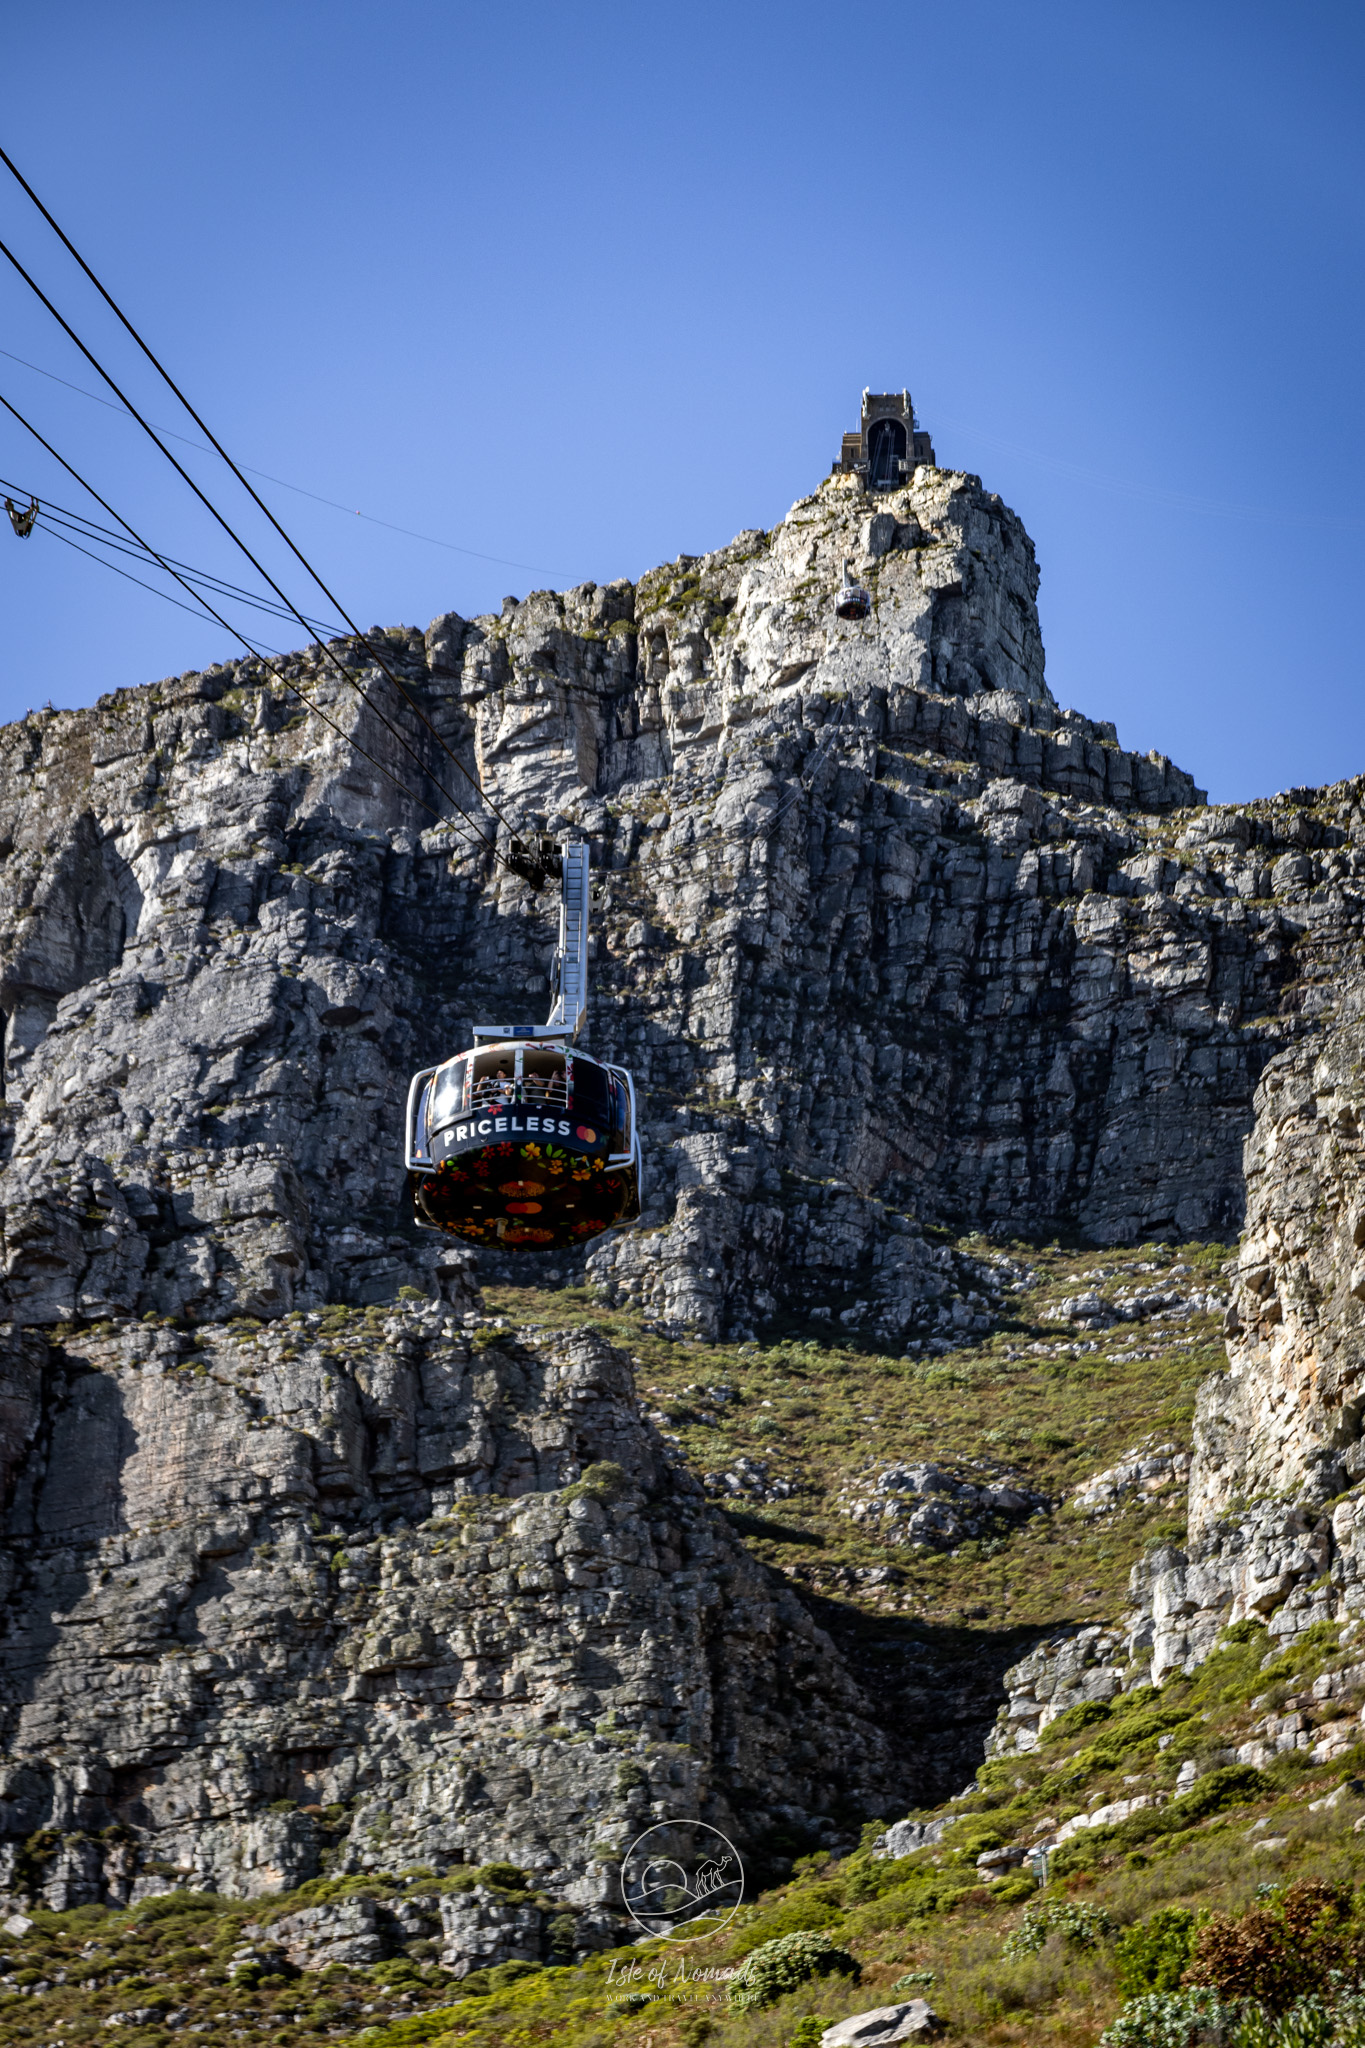 If you are feeling lazy, you can take the Cable Car up and down Table Mountain